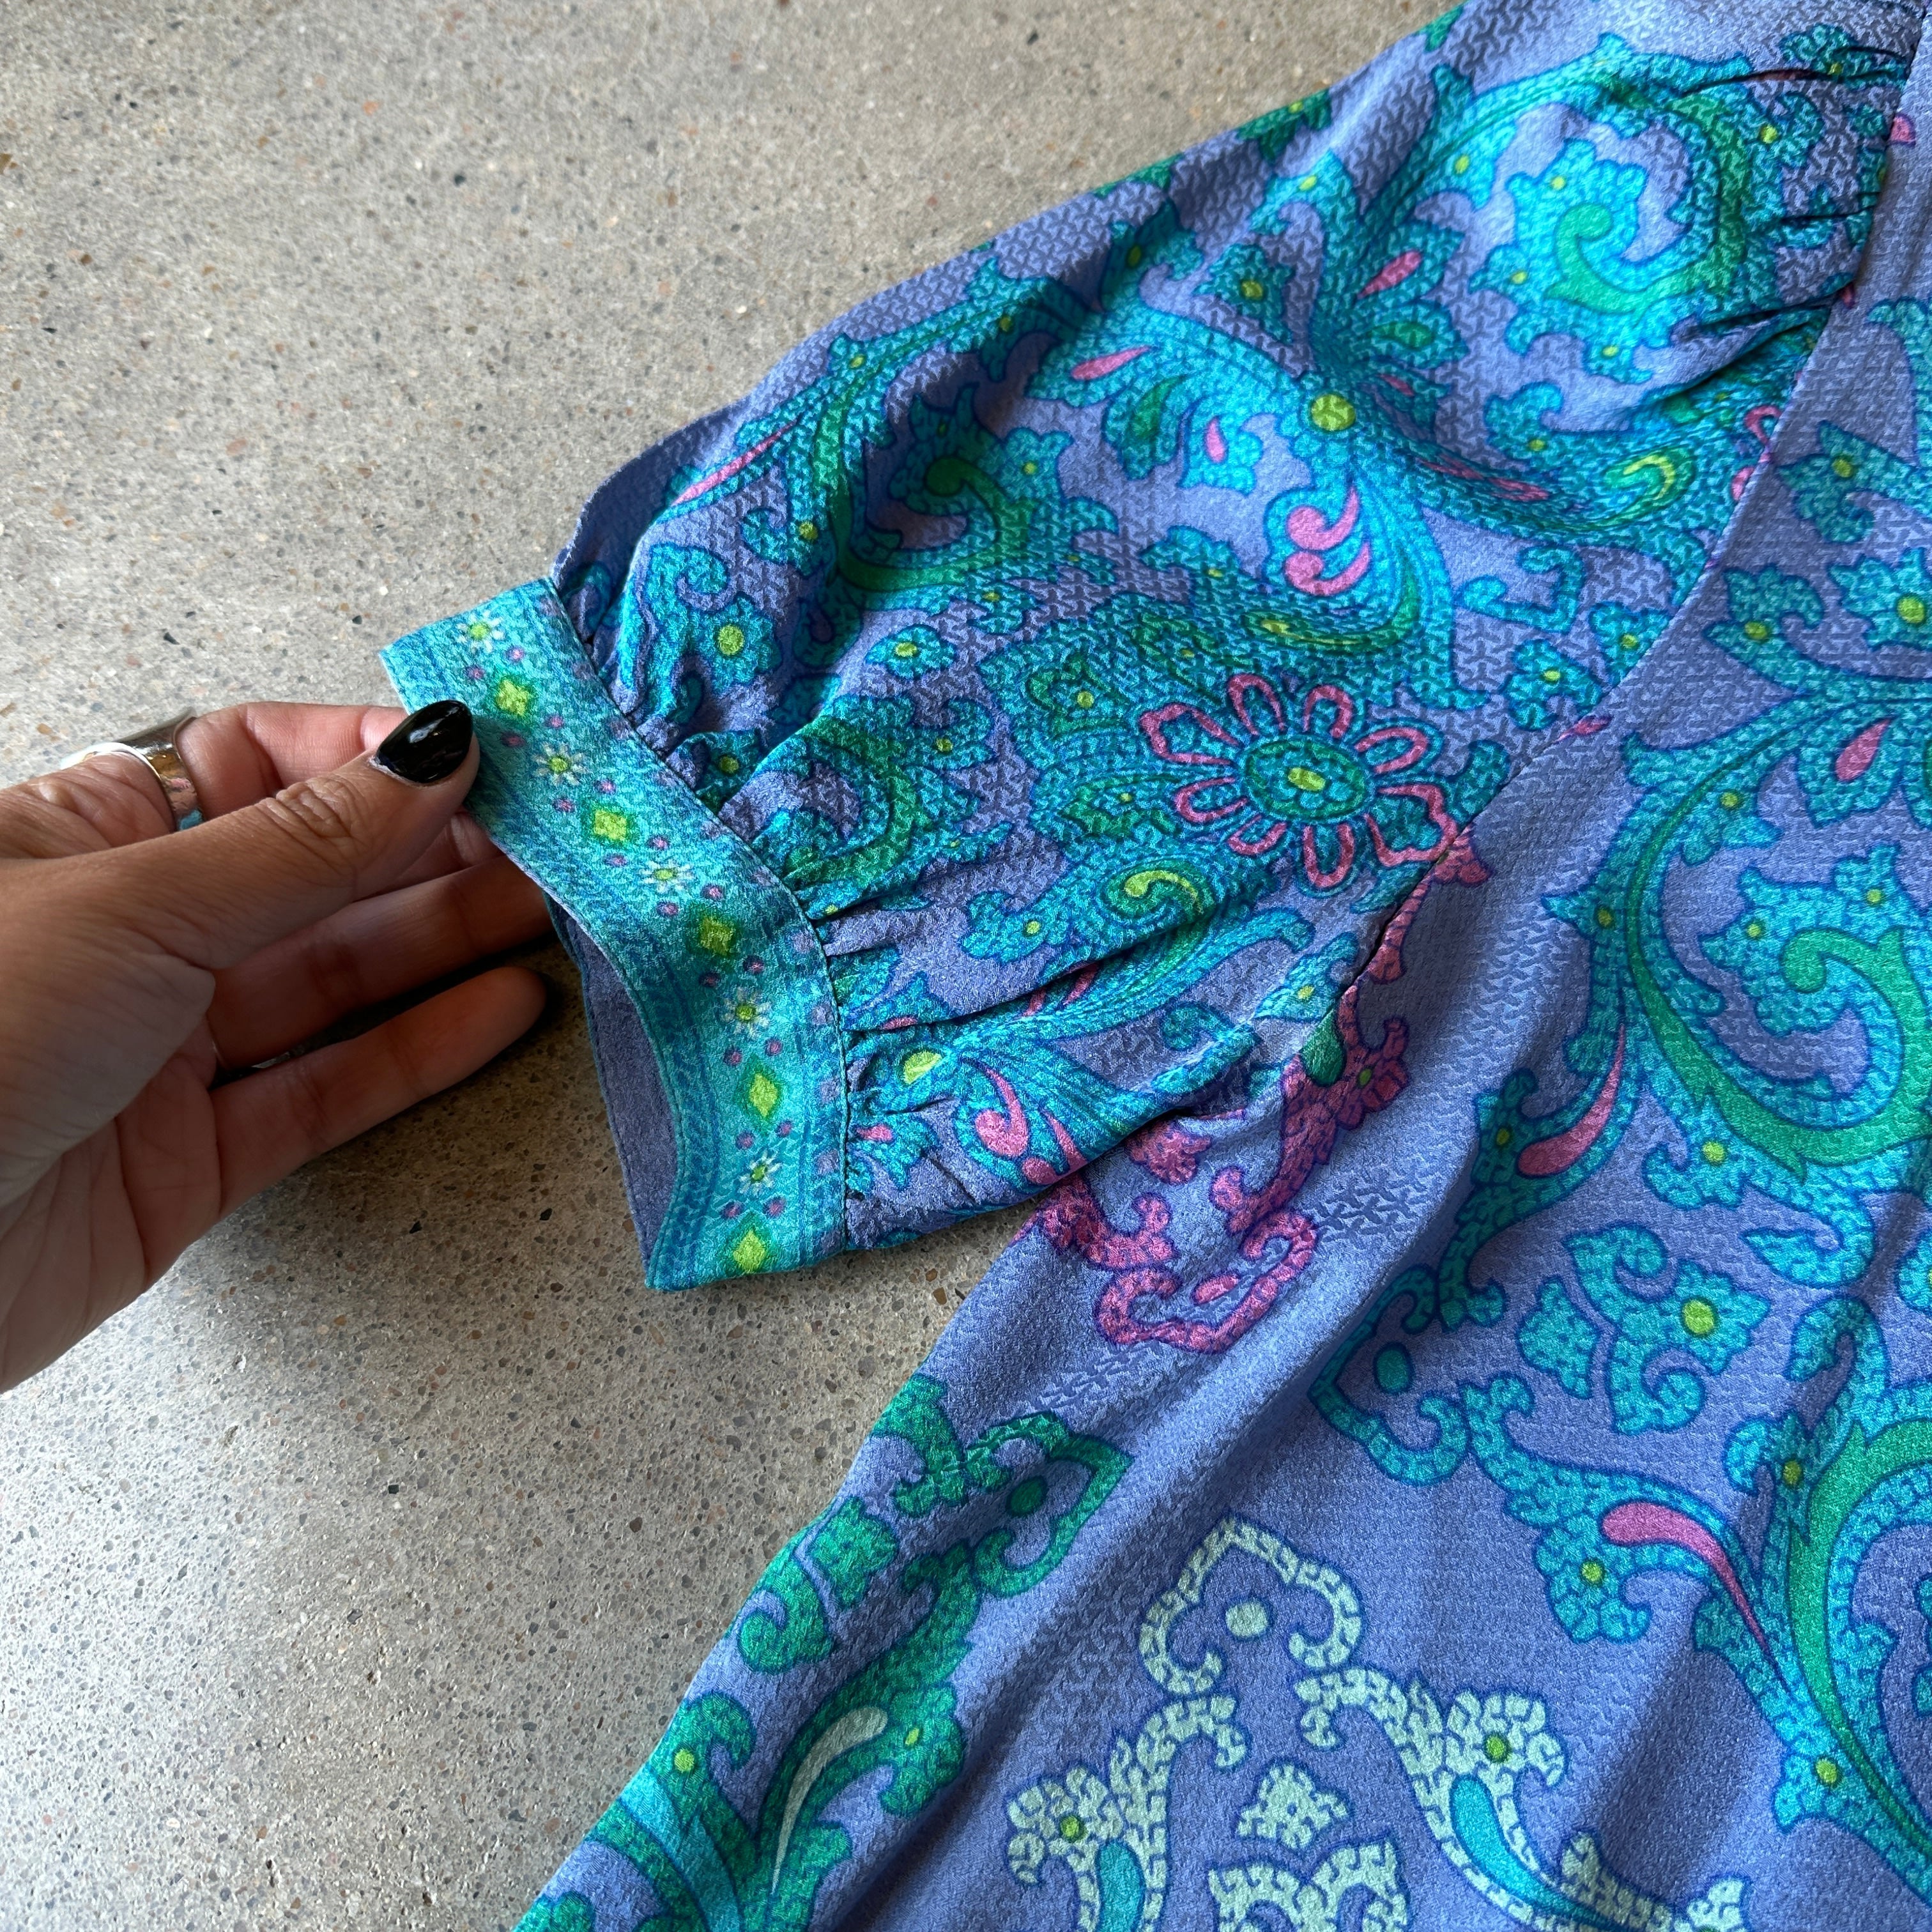 VTG purple and blue silk skirt and top set